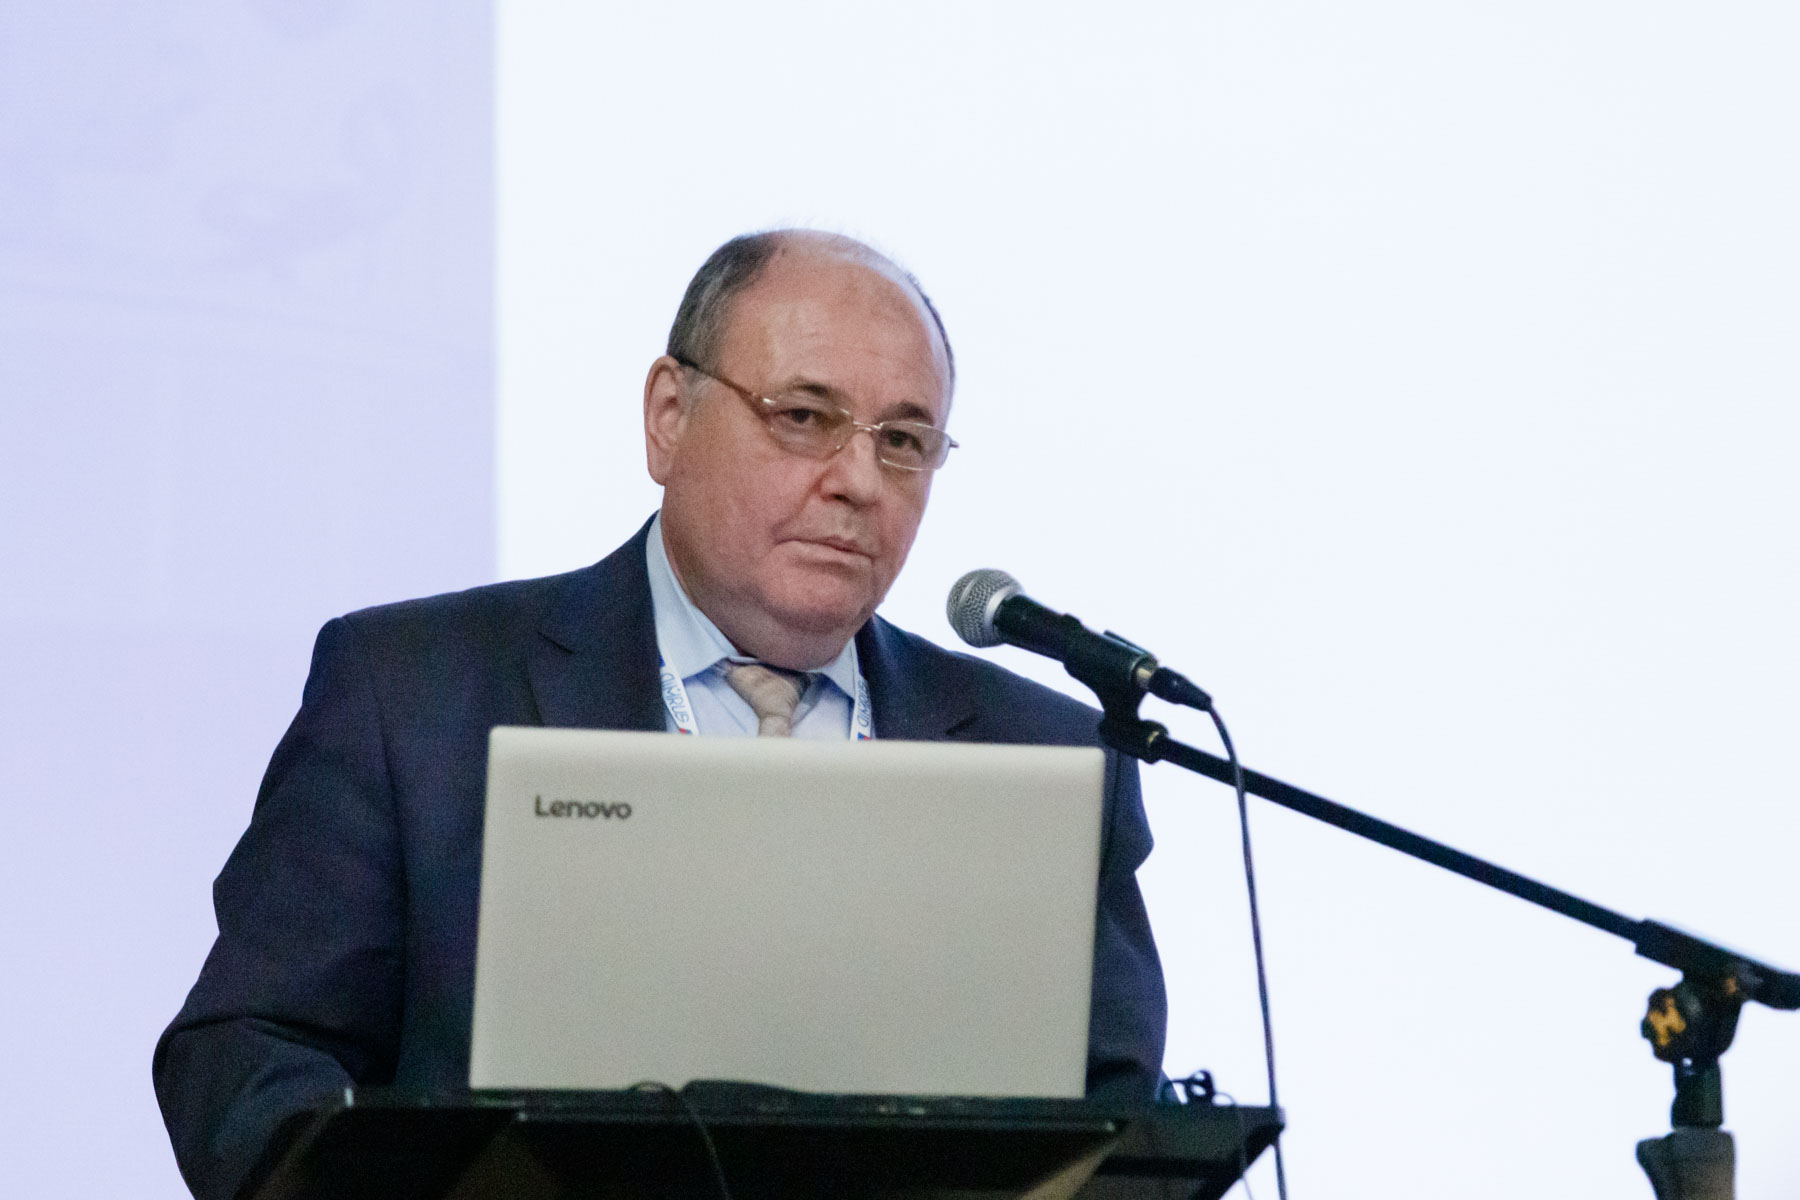 Vladimir Ustinov at the sixteenth annual conference of Dimrus company in Perm (photo: Dimrus company)